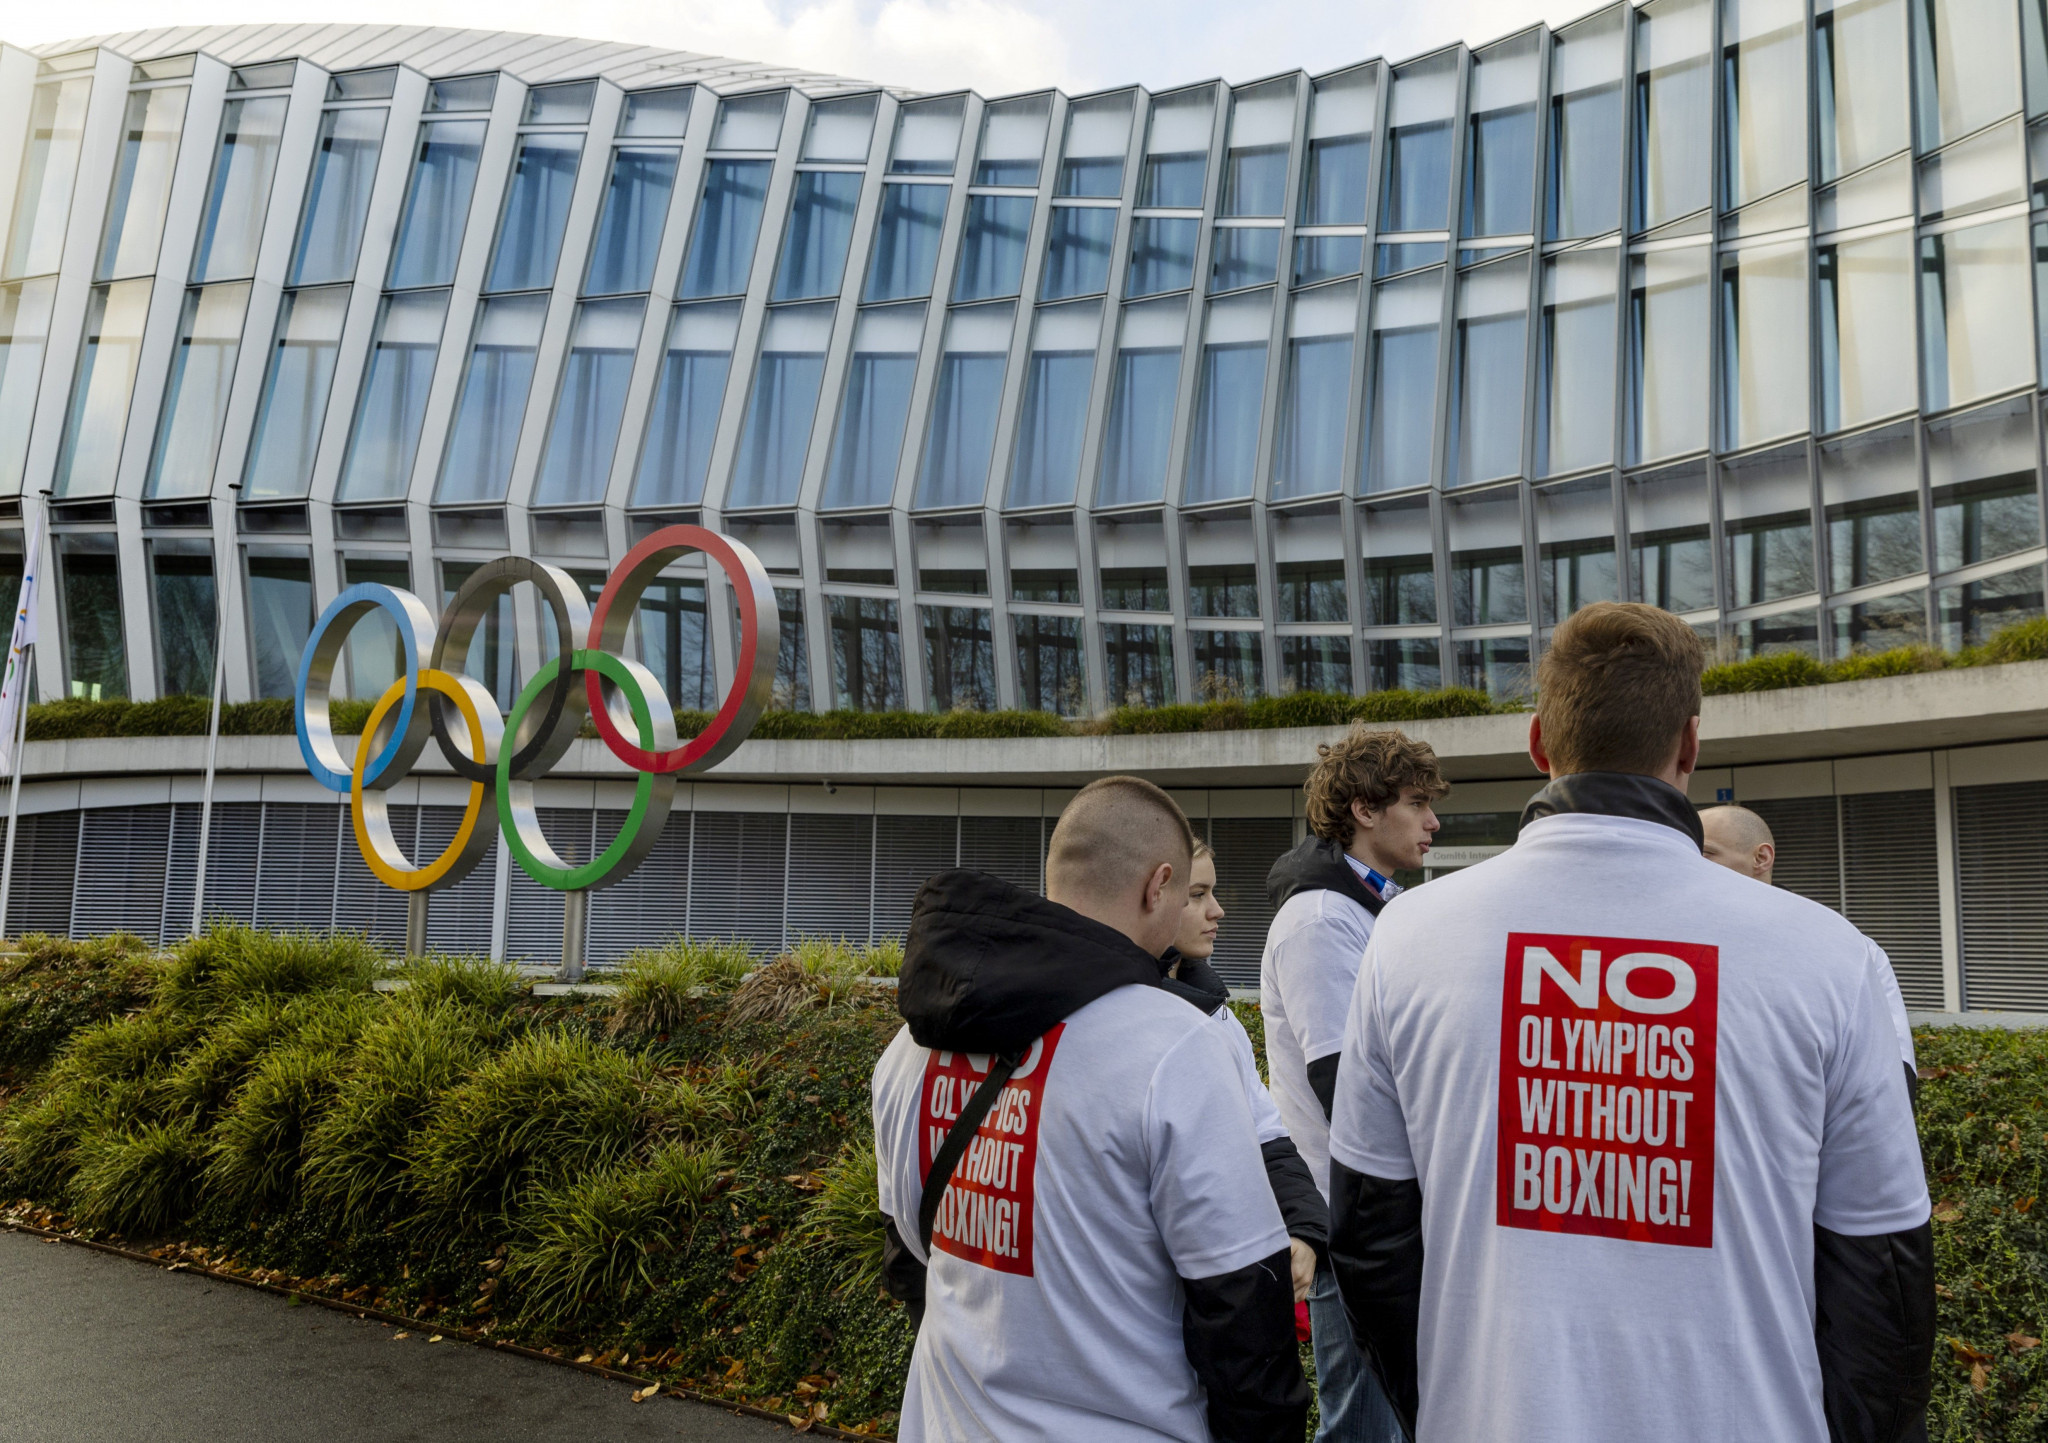 Protesters calling for no Olympics without boxing gathered outside Olympic House in Lausanne ©Getty Images